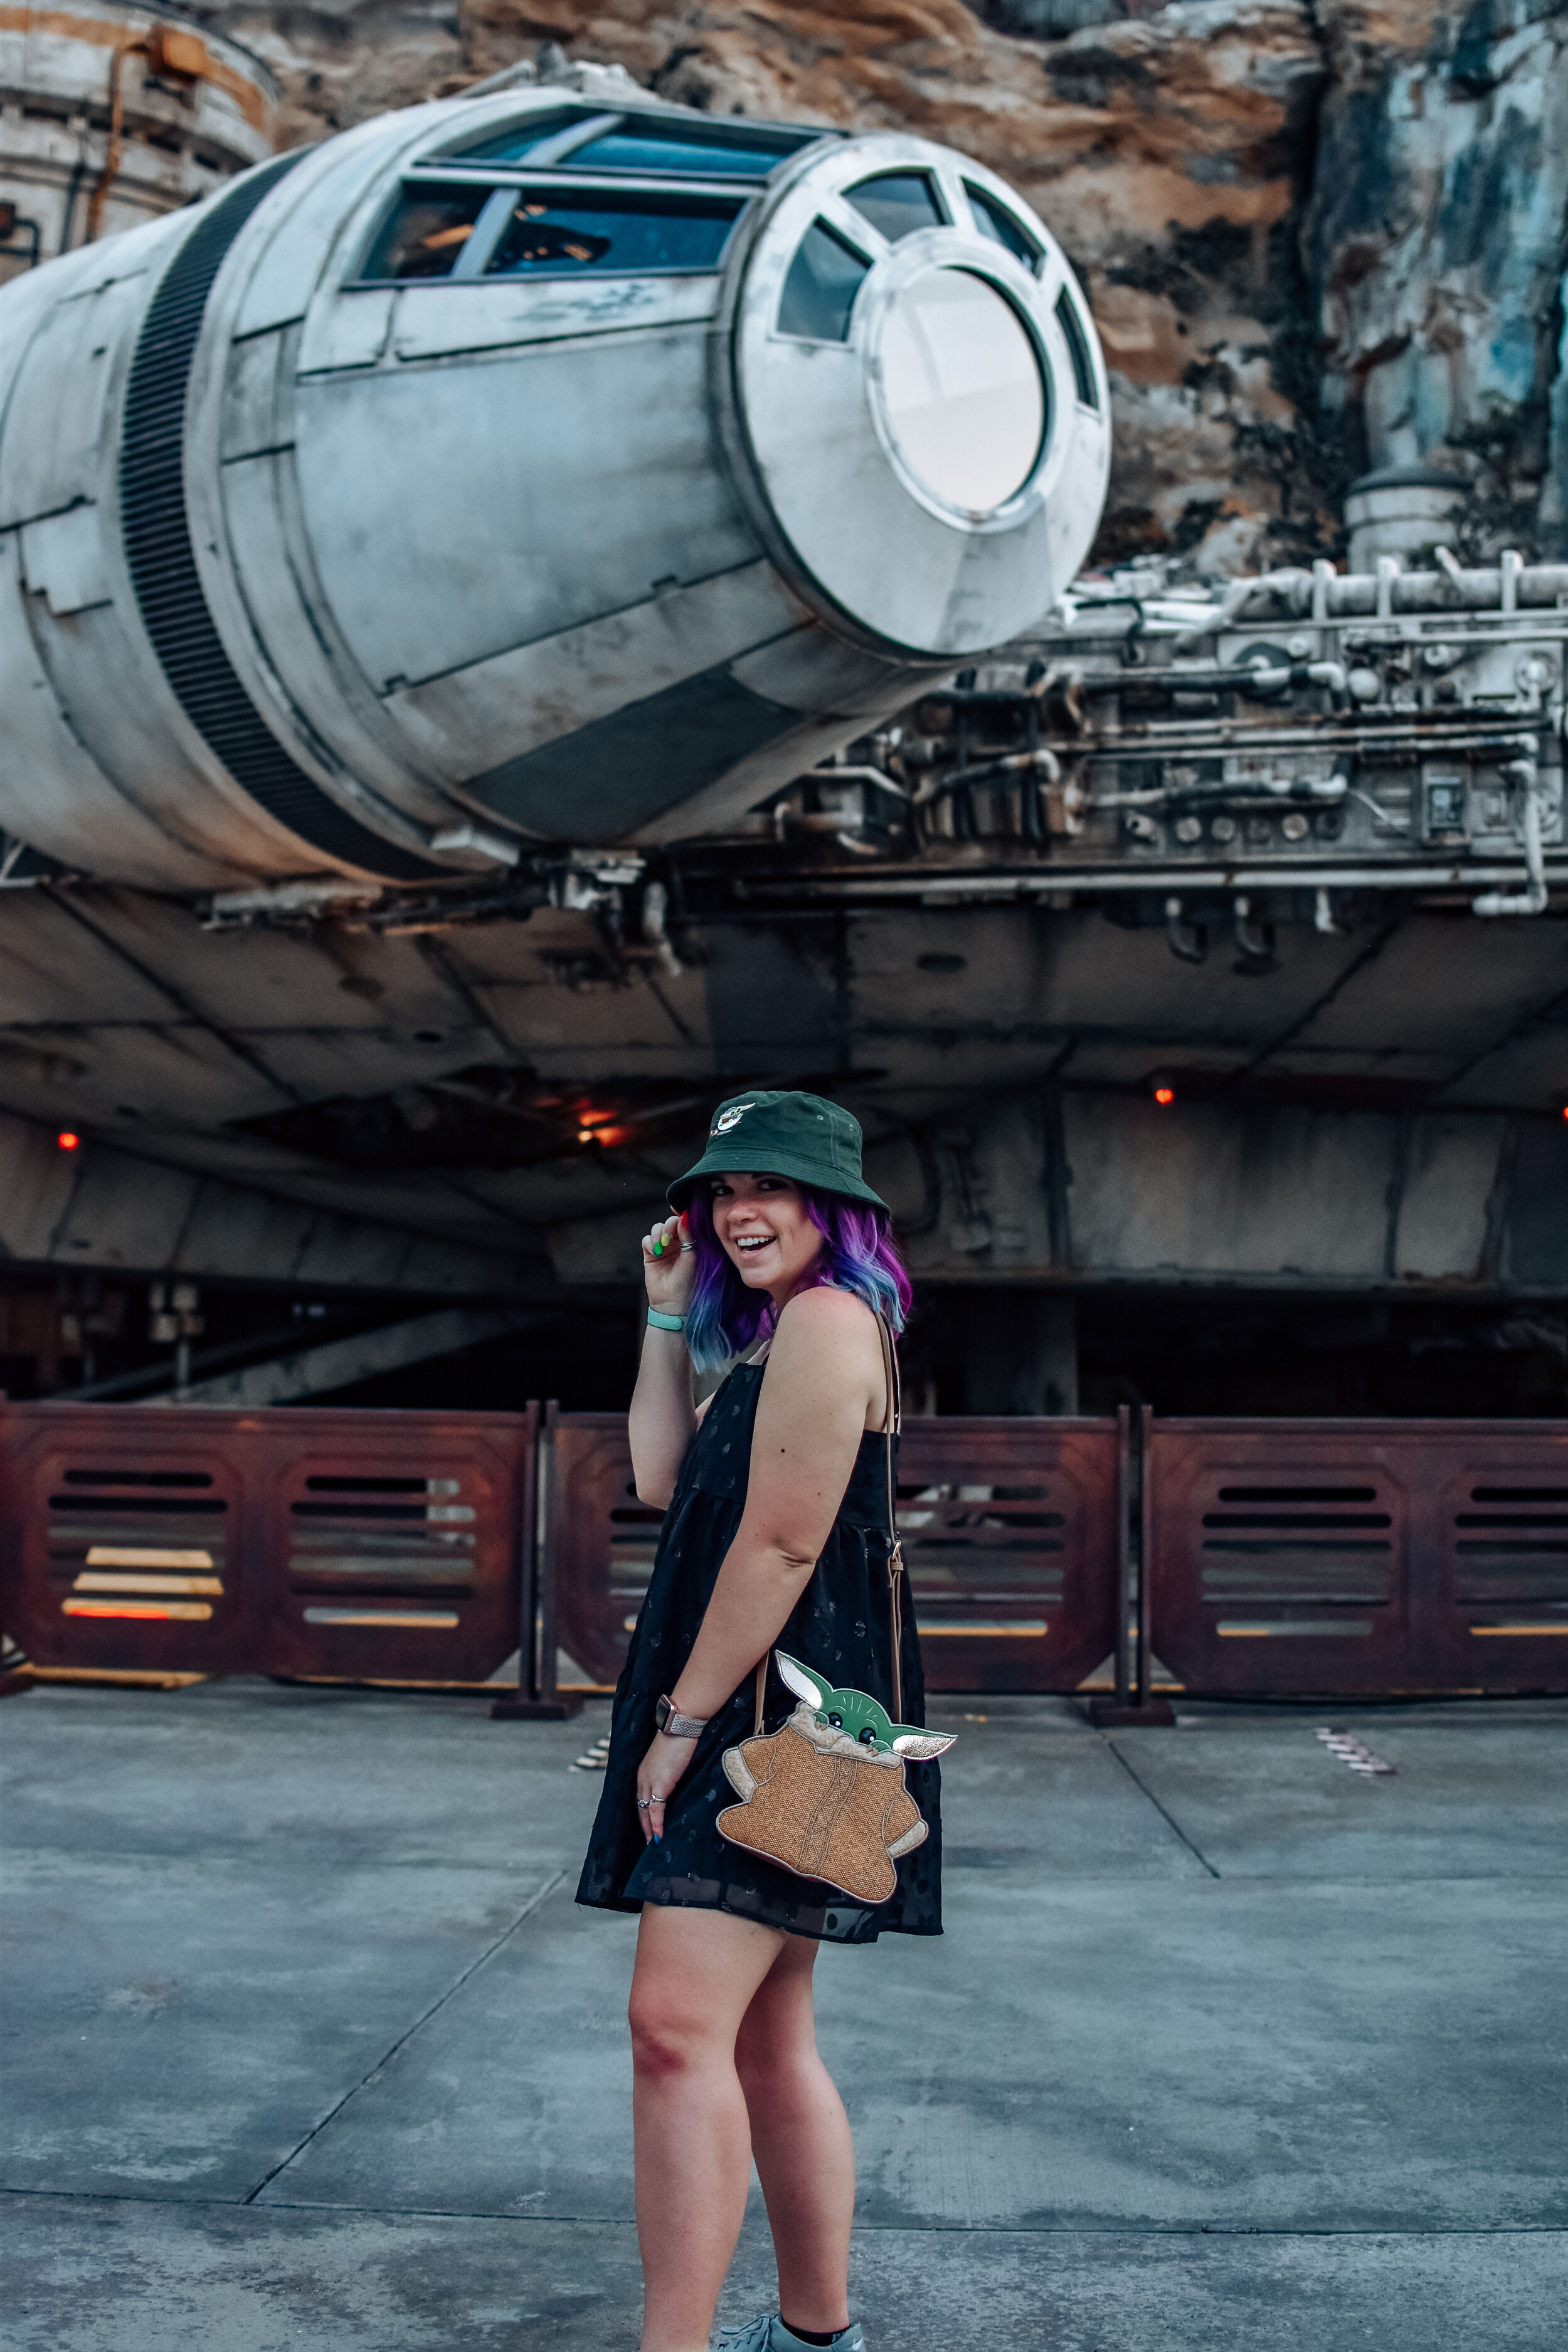 WHAT TO WEAR TO STAR WARS: GALAXY'S EDGE AT HOLLYWOOD STUDIOS